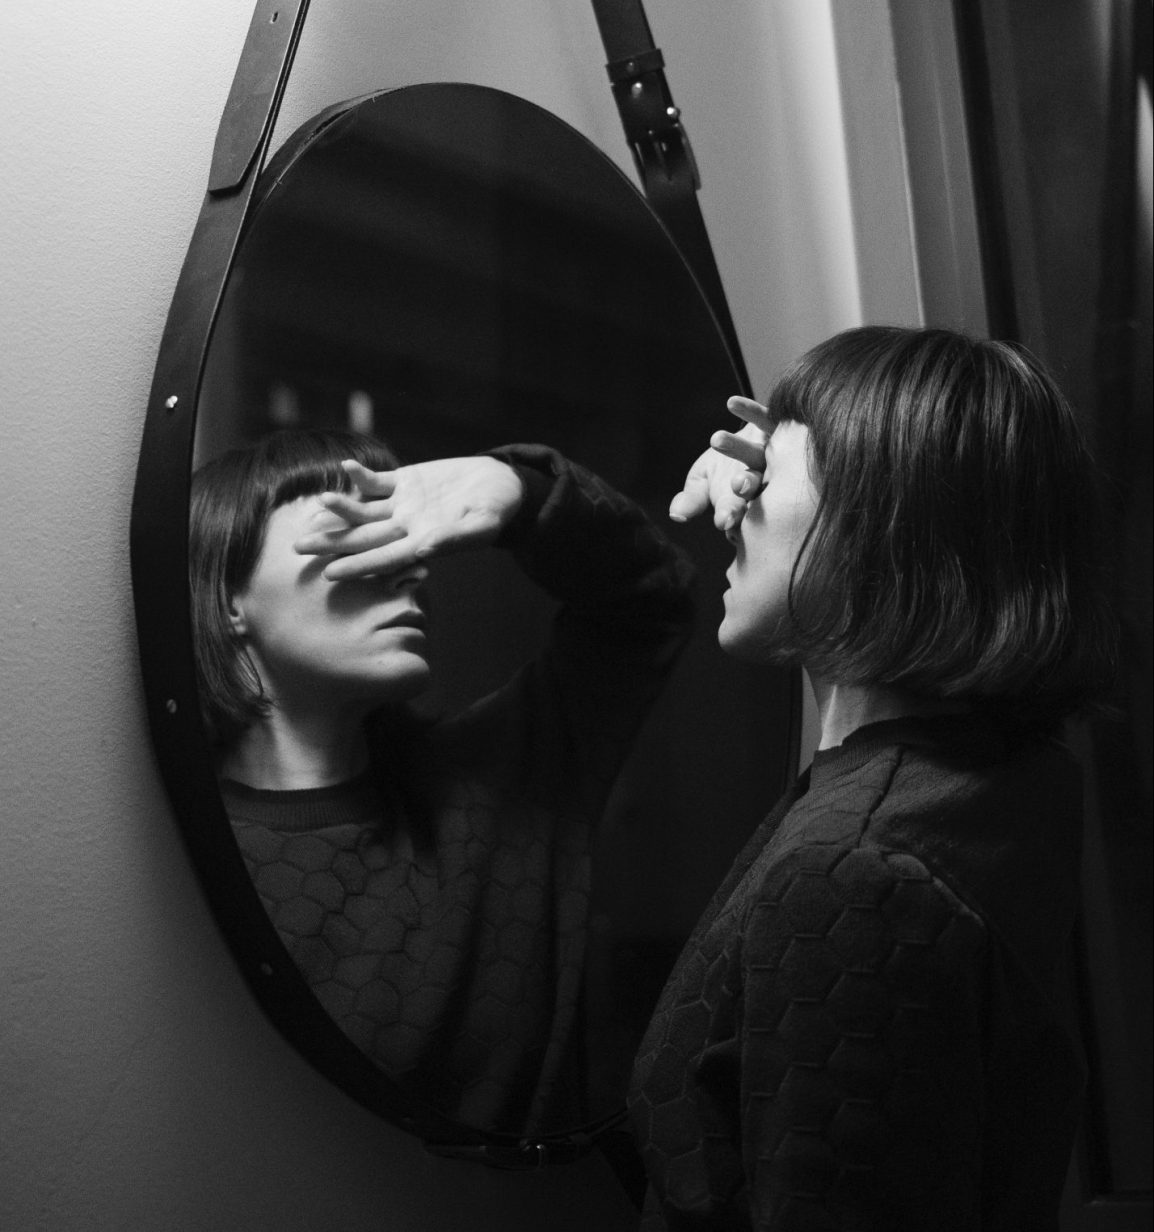 A woman stands in front of a mirror and covers her eyes